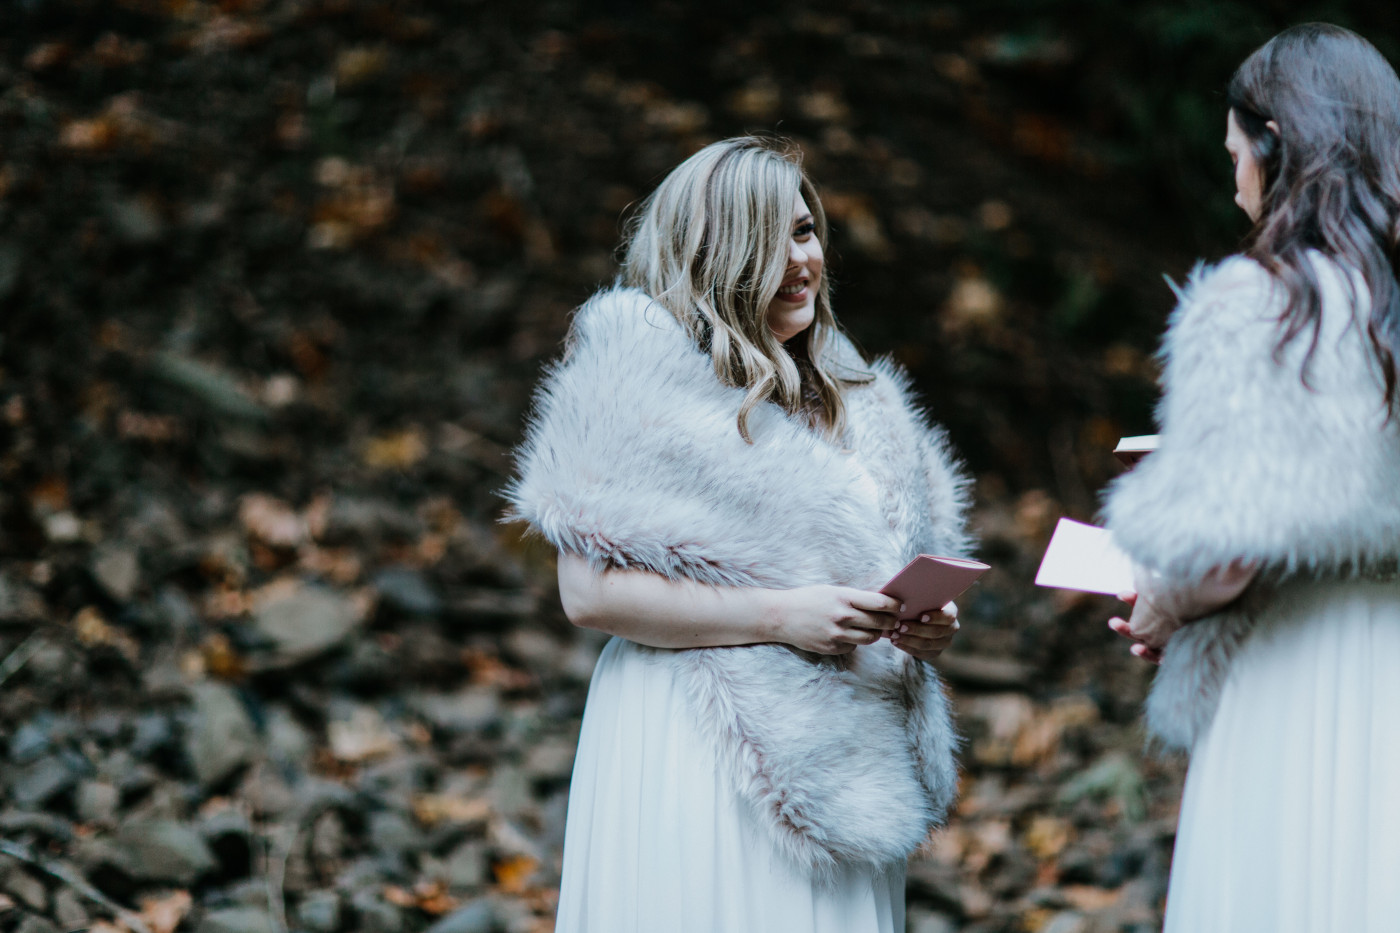 Hayley and Tiffany recite vows. Elopement photography at the Columbia River Gorge by Sienna Plus Josh.